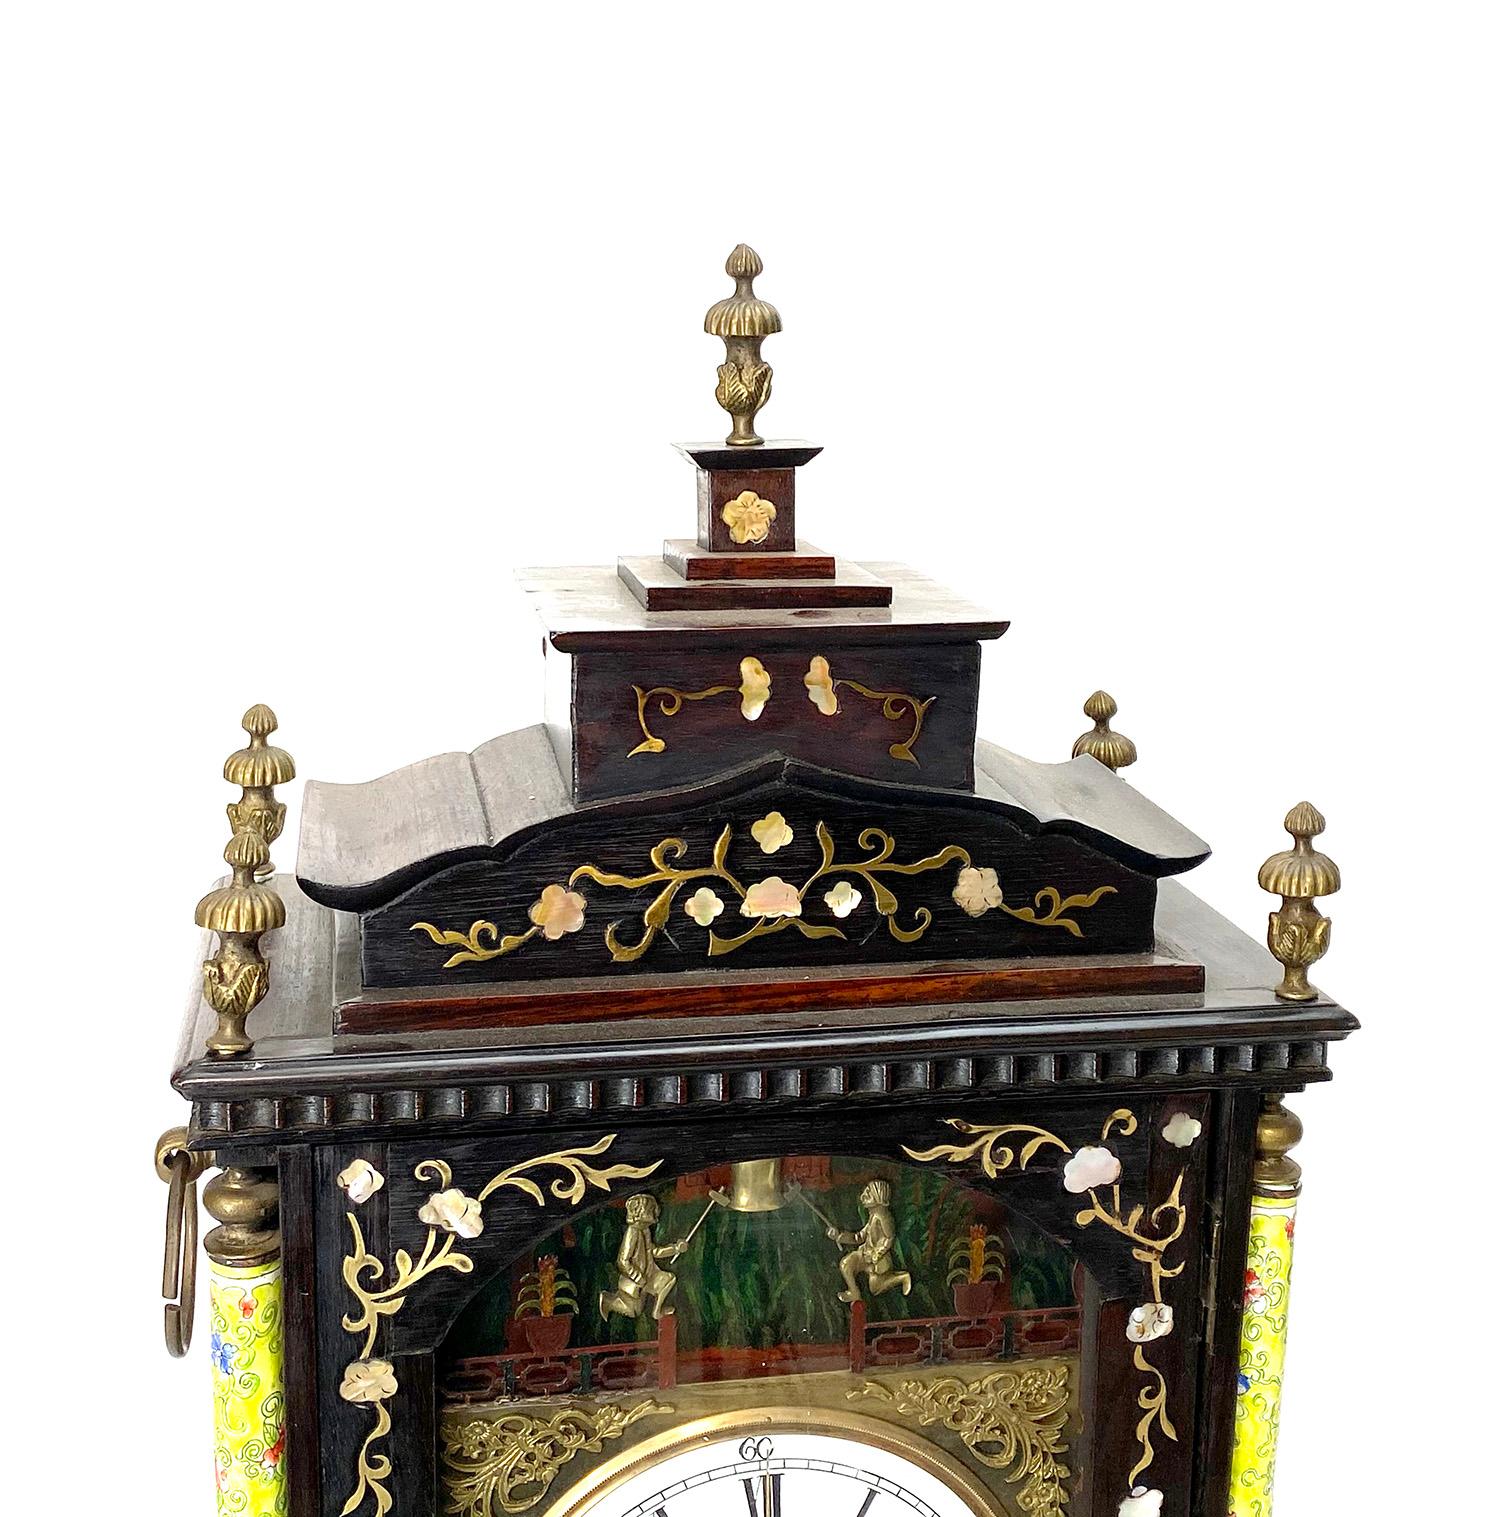 Antique Chinese Mother of Pearl Inlaid Automaton Figure Enamel Bracket Clock In Good Condition For Sale In Danville, CA